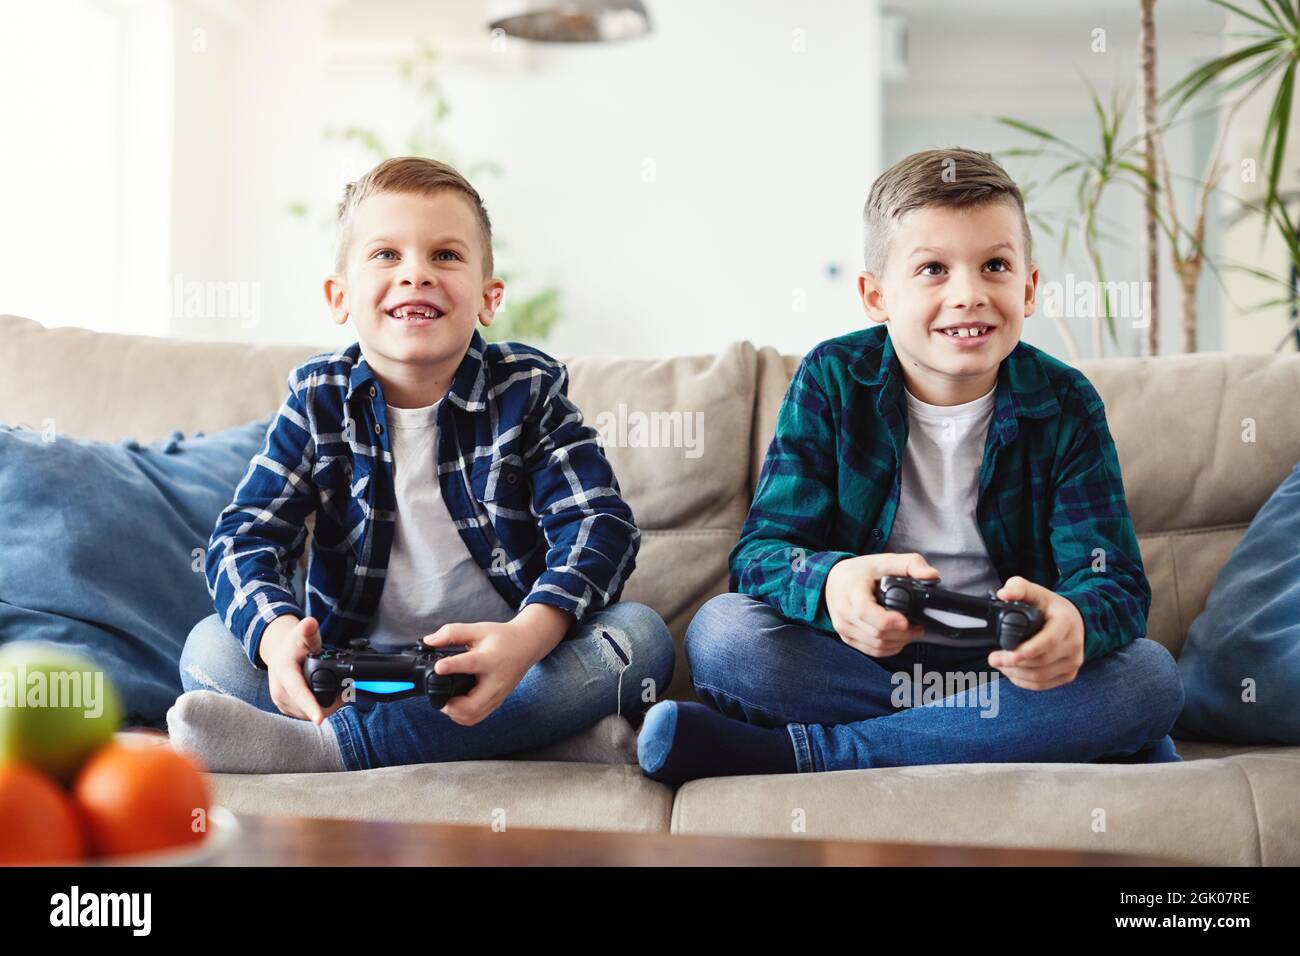 Happy Little Cute Kid Playing Video Game. the Boy Has Addiction To